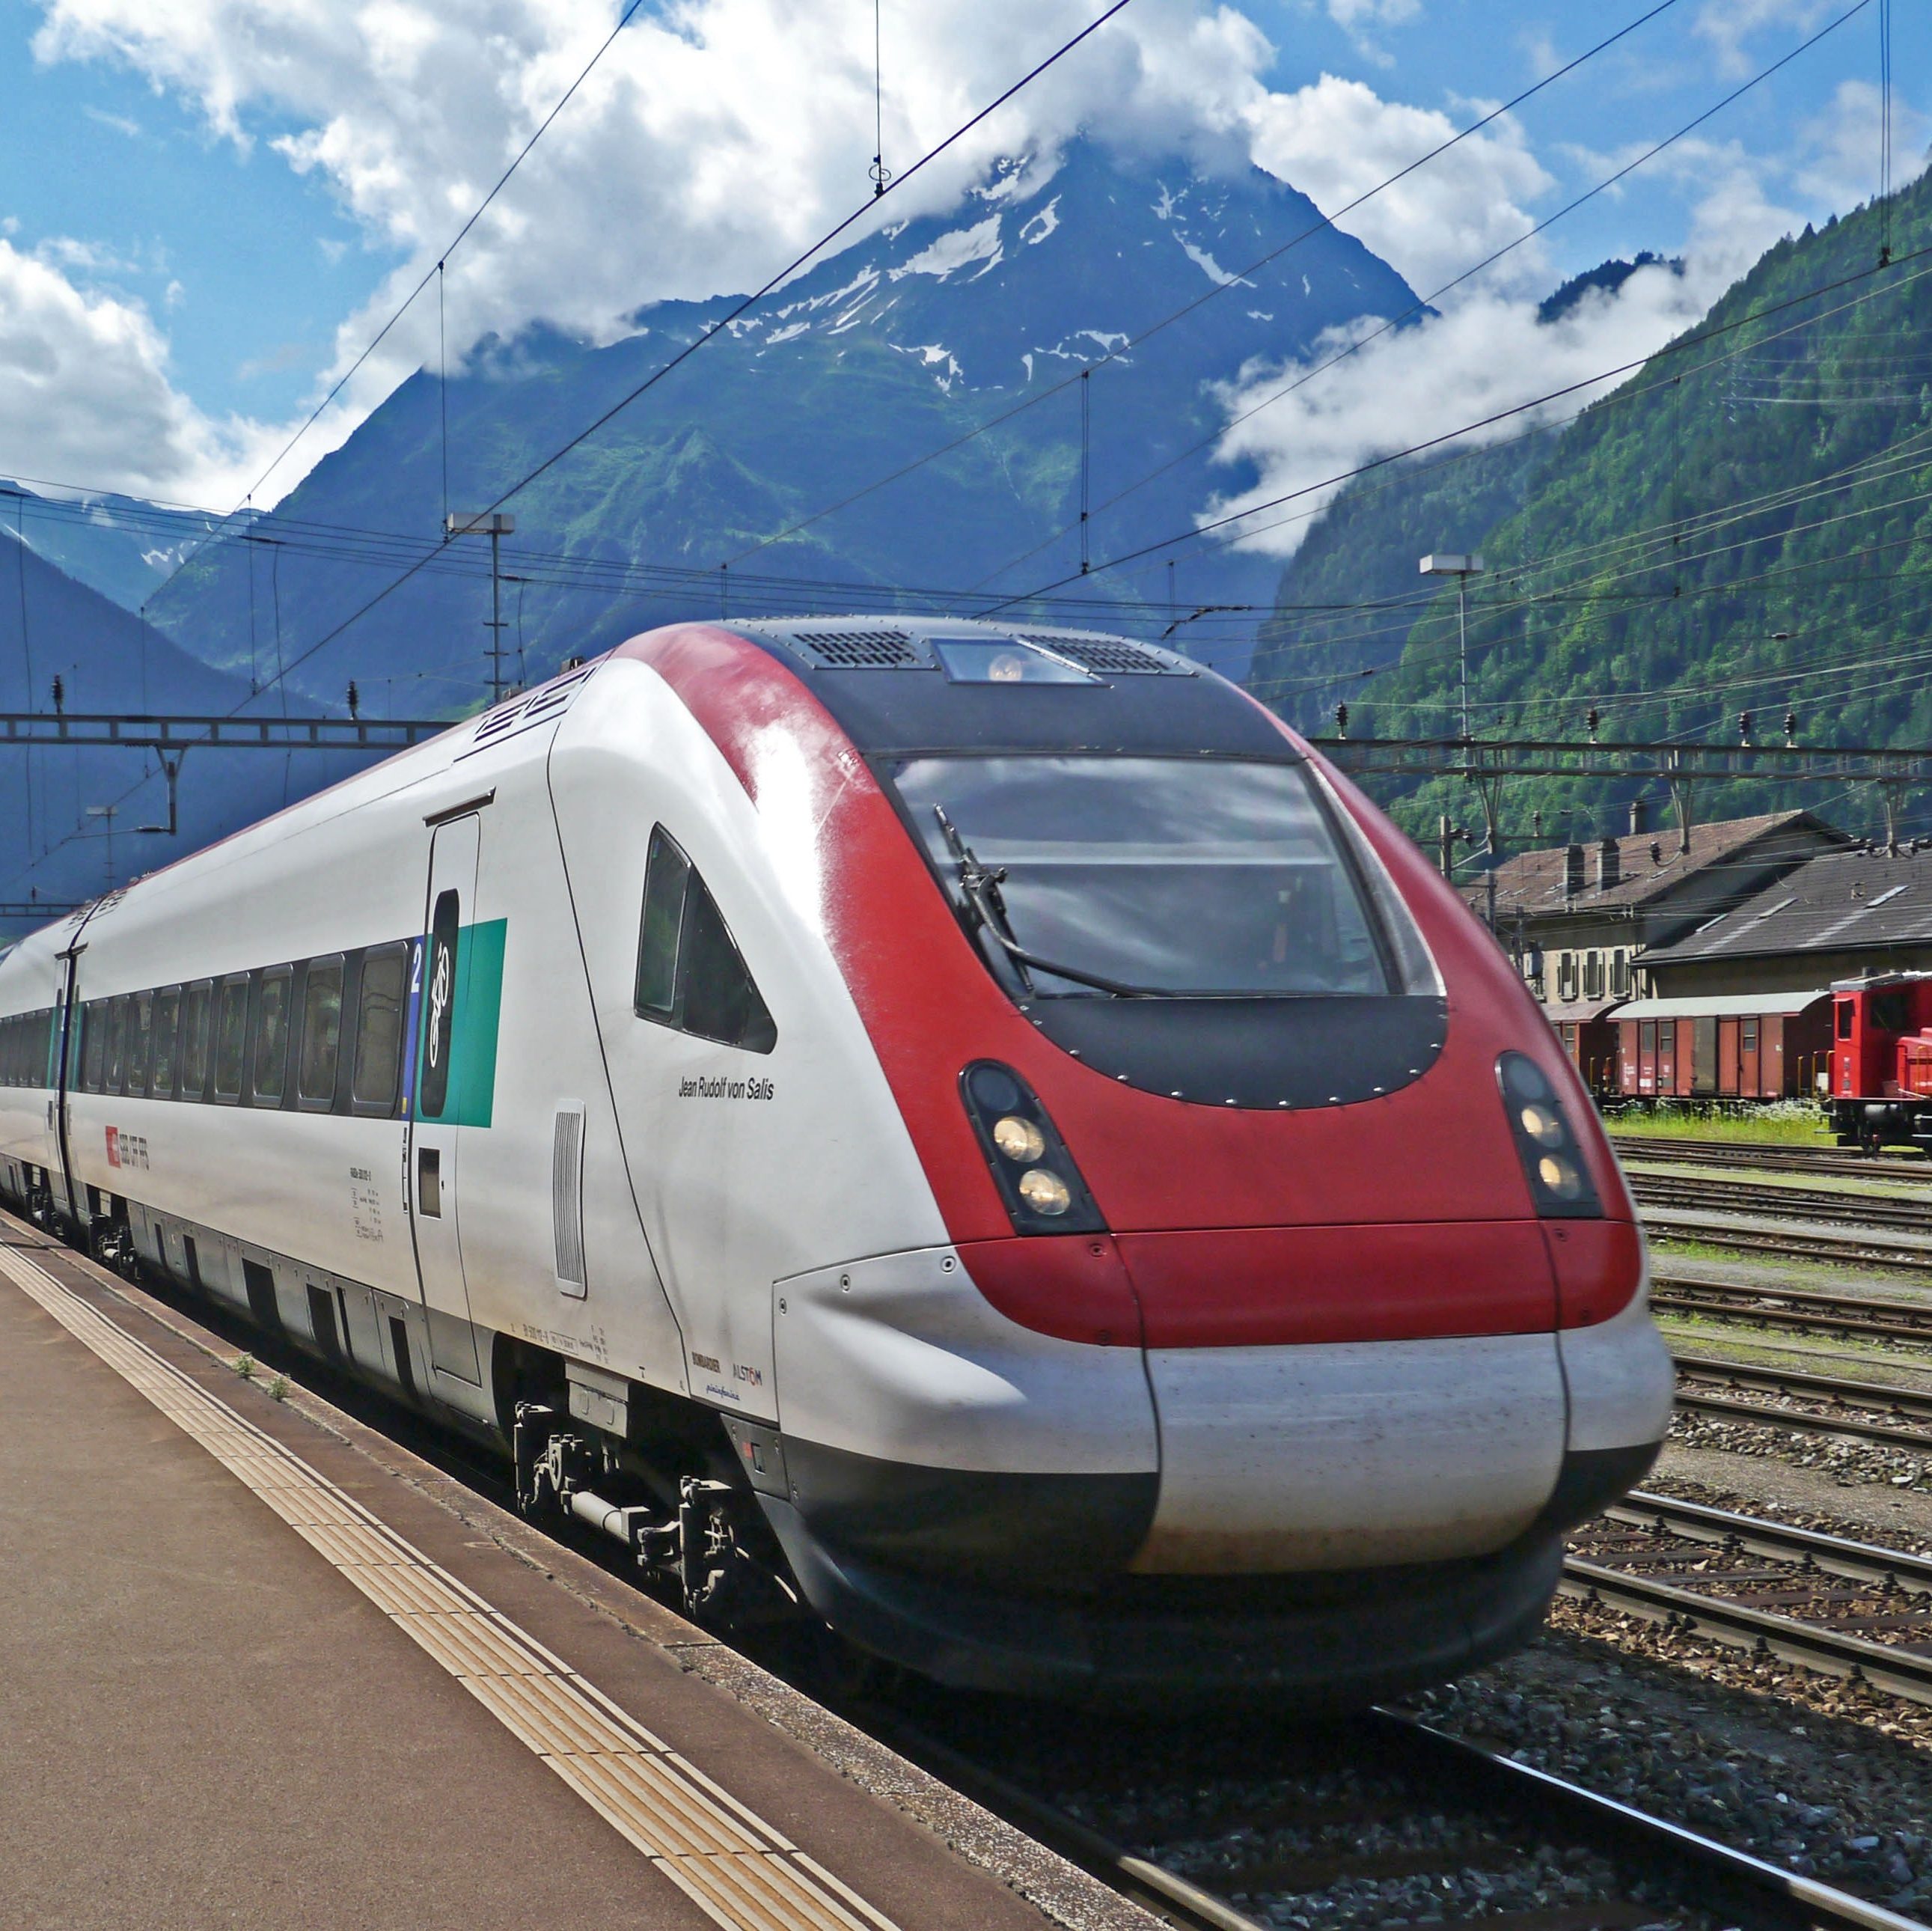 A train is stopped at a station in a mountainous region. Behind the mountains is a cloudy sky.